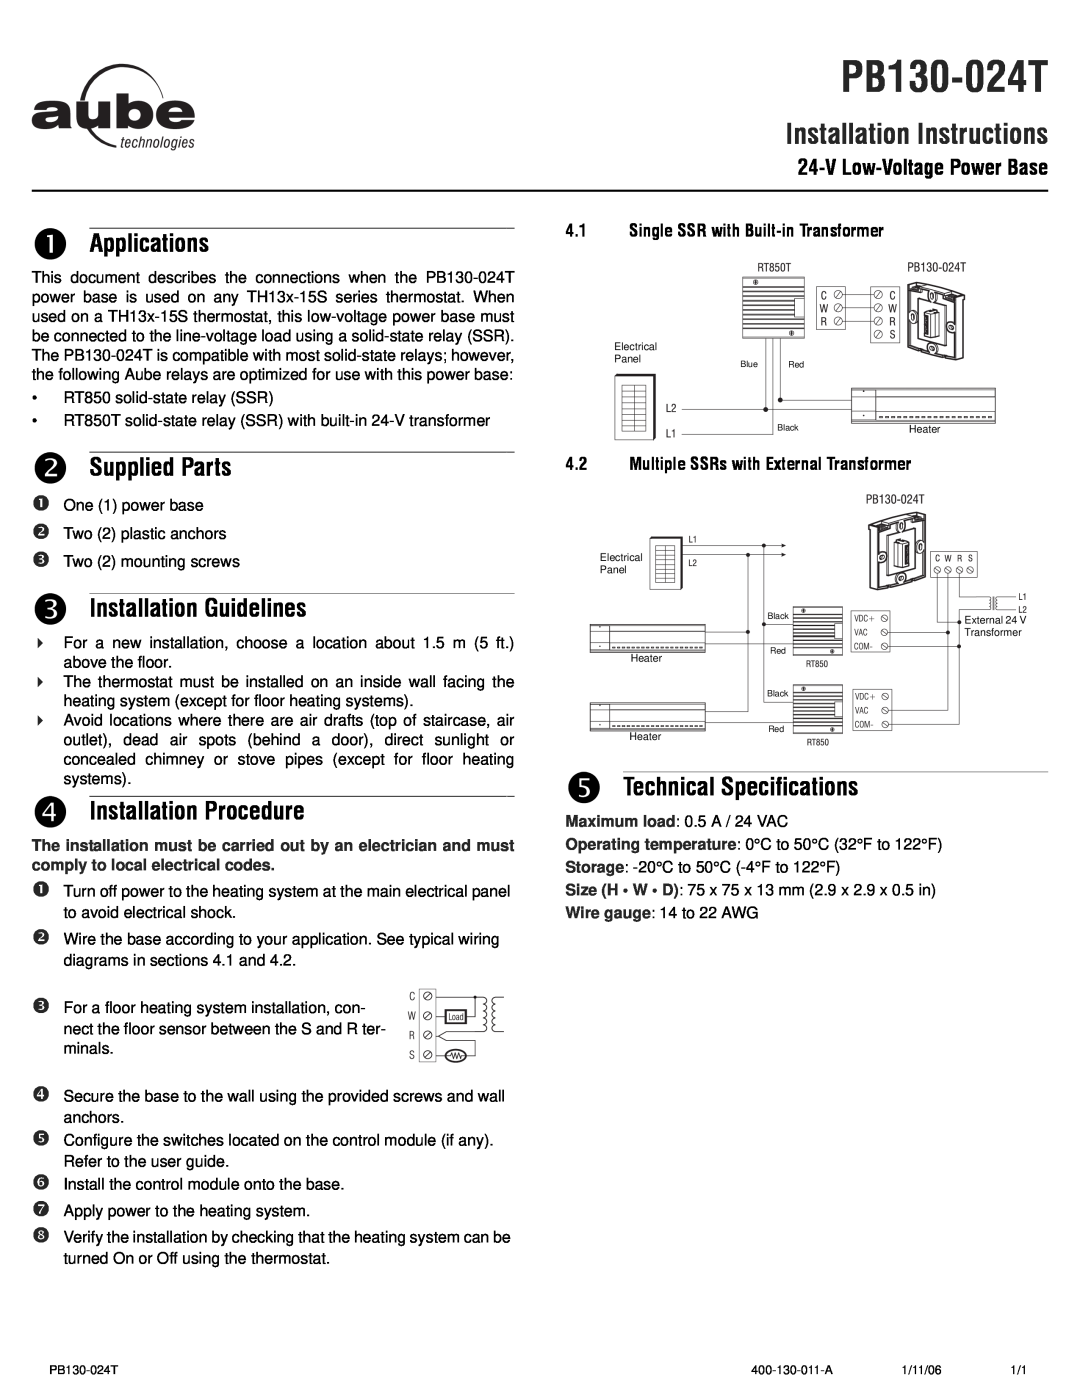 Aube Technologies TH133-15S manual n Applications, o Supplied Parts, p Installation Guidelines, q Installation Procedure 